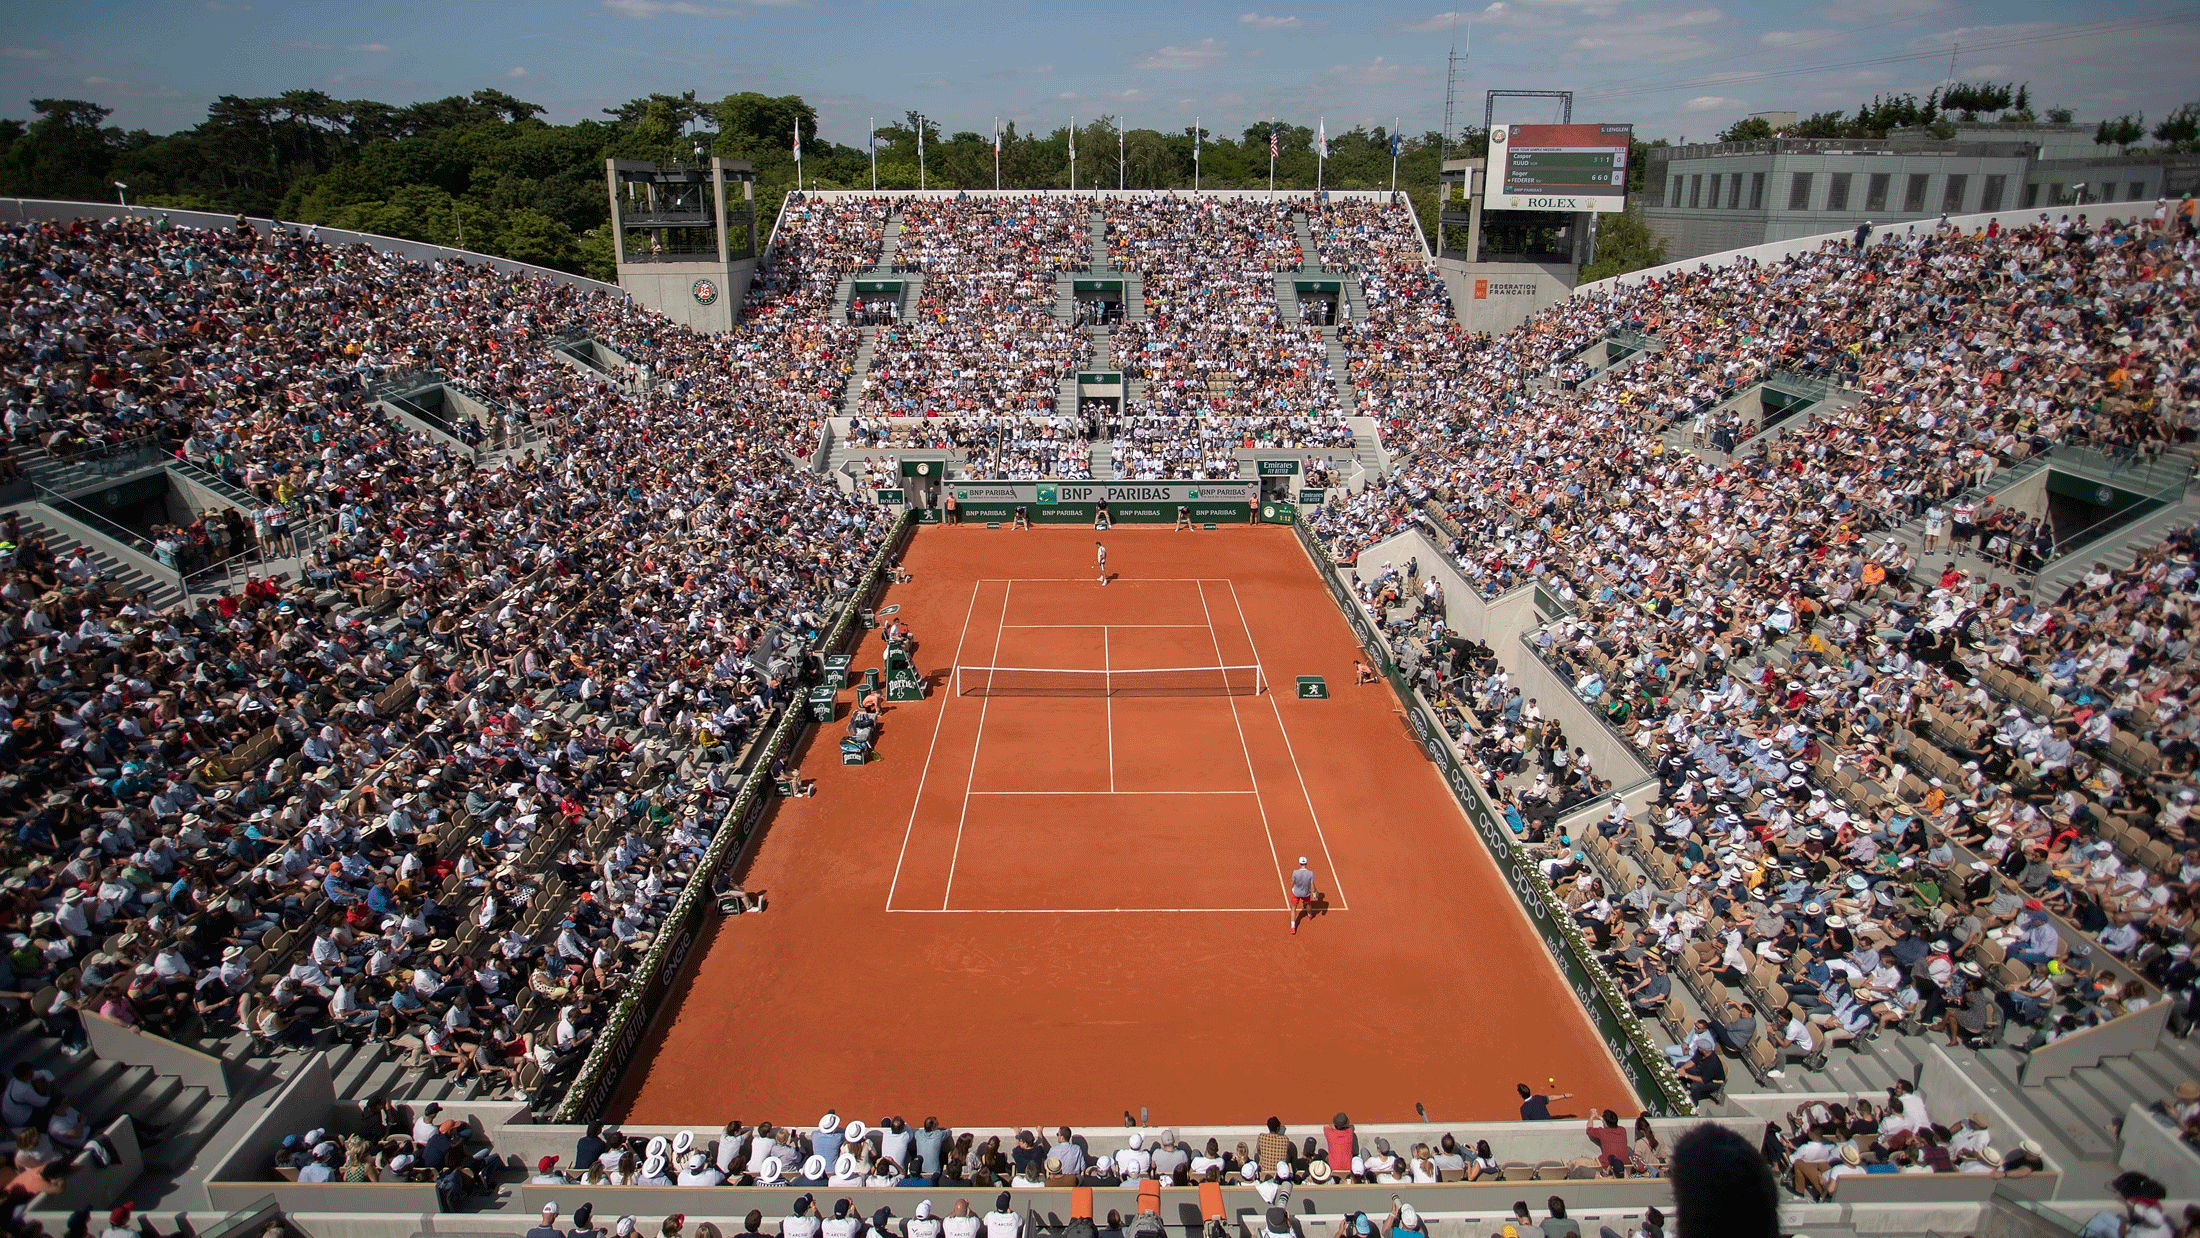 2022 French Open How to watch, whos playing, whos favored to win